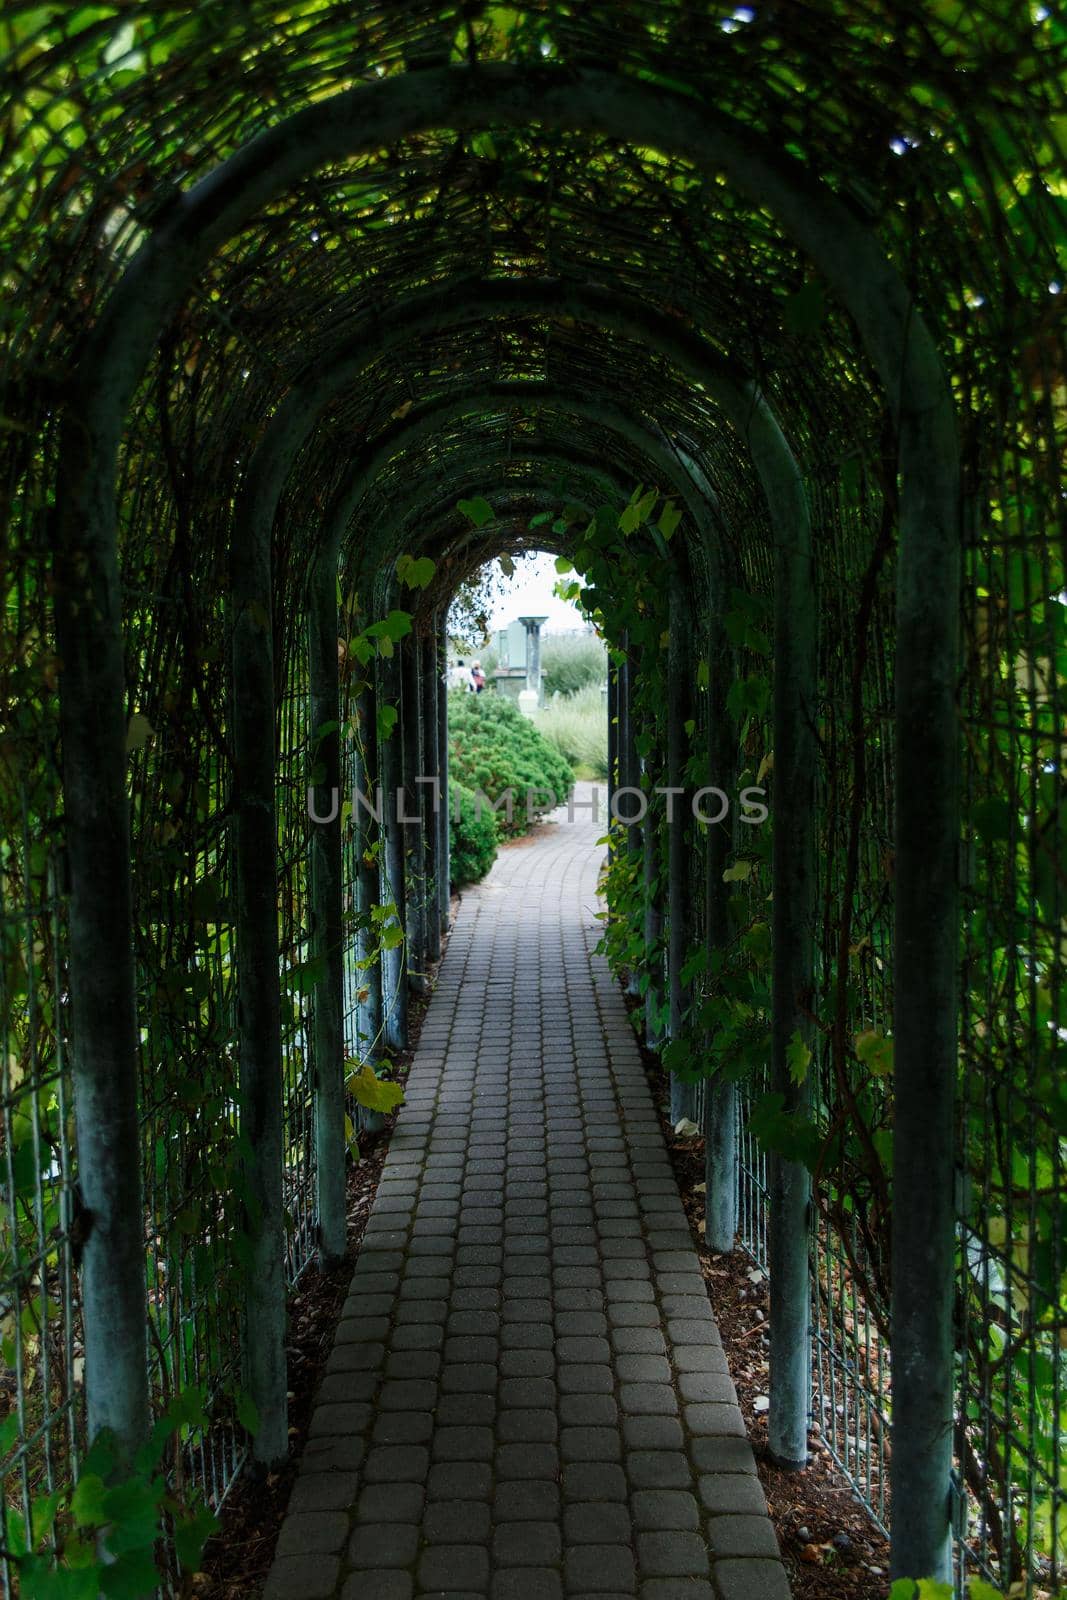 Pedestrian tunnel overgrown with wild grapes in the Botanical garden